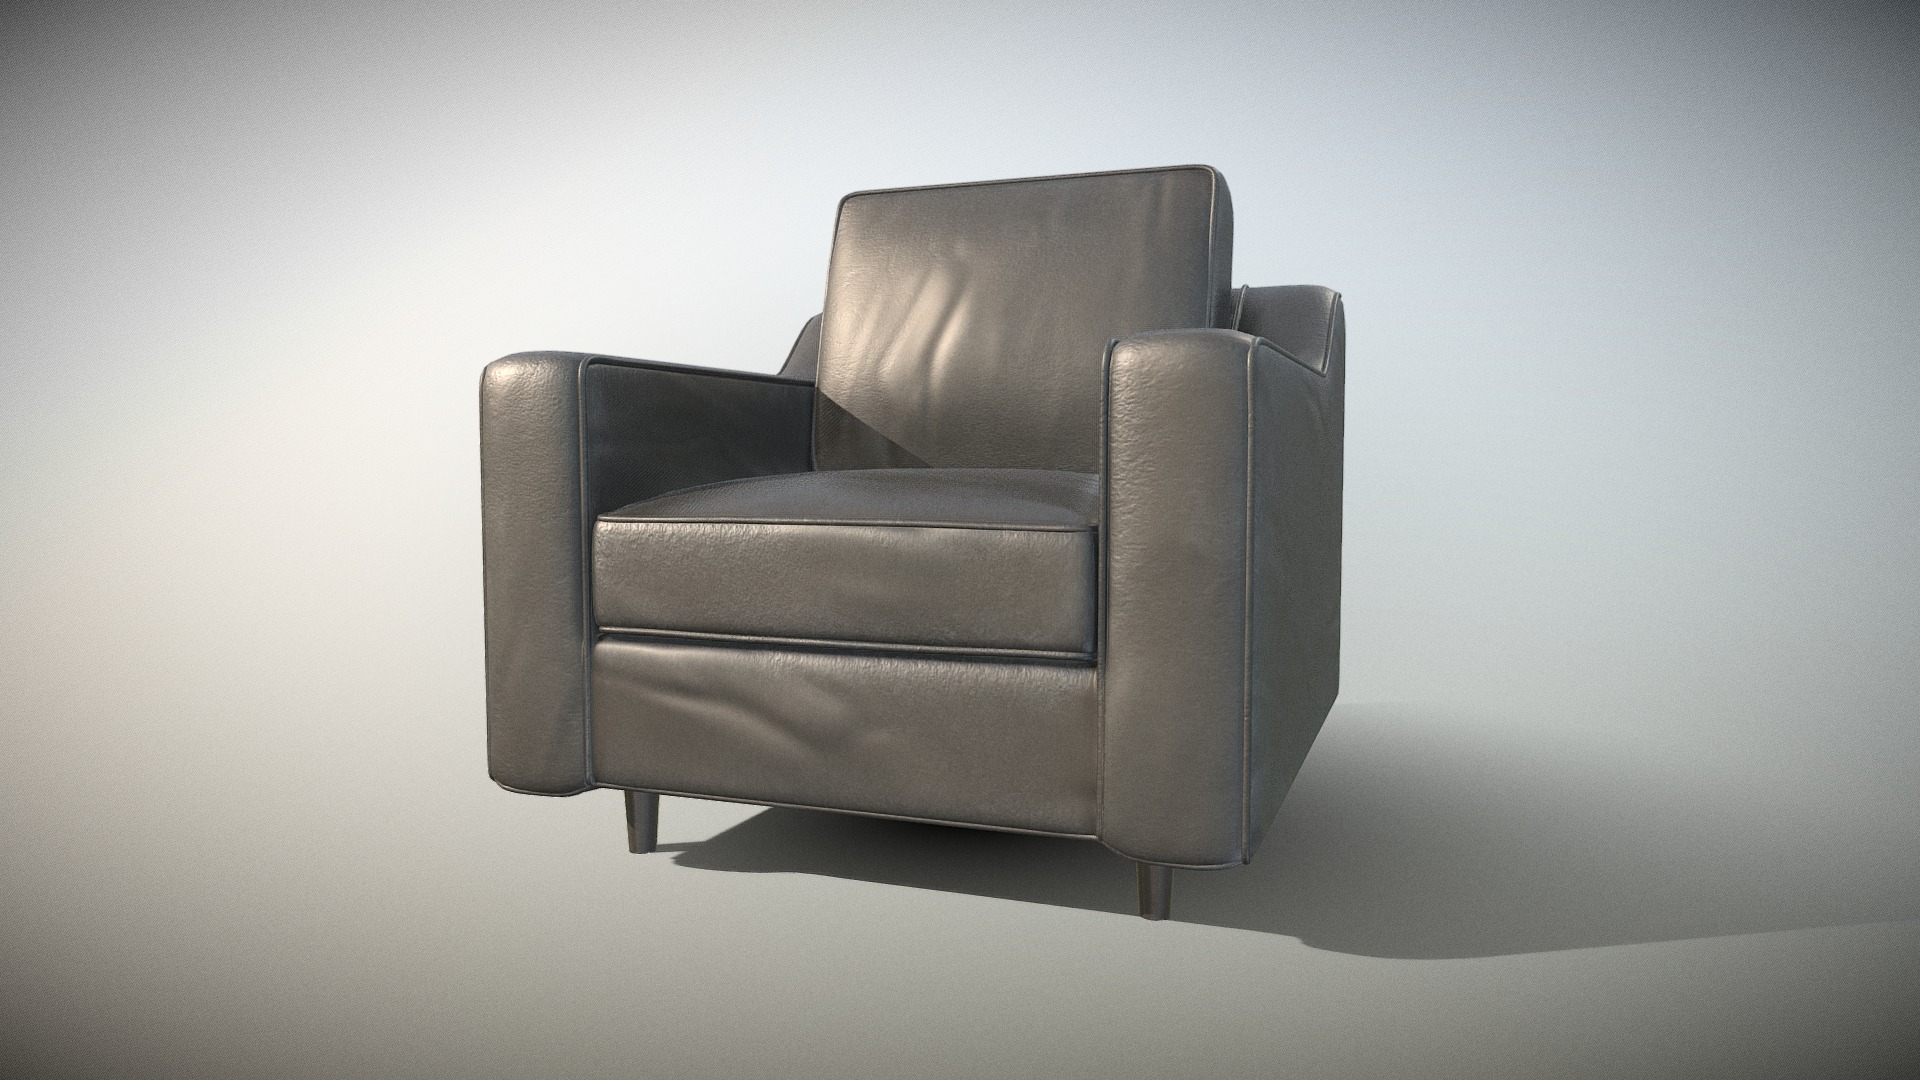 3D model Garrison Sofa 02 - This is a 3D model of the Garrison Sofa 02. The 3D model is about a black leather chair.